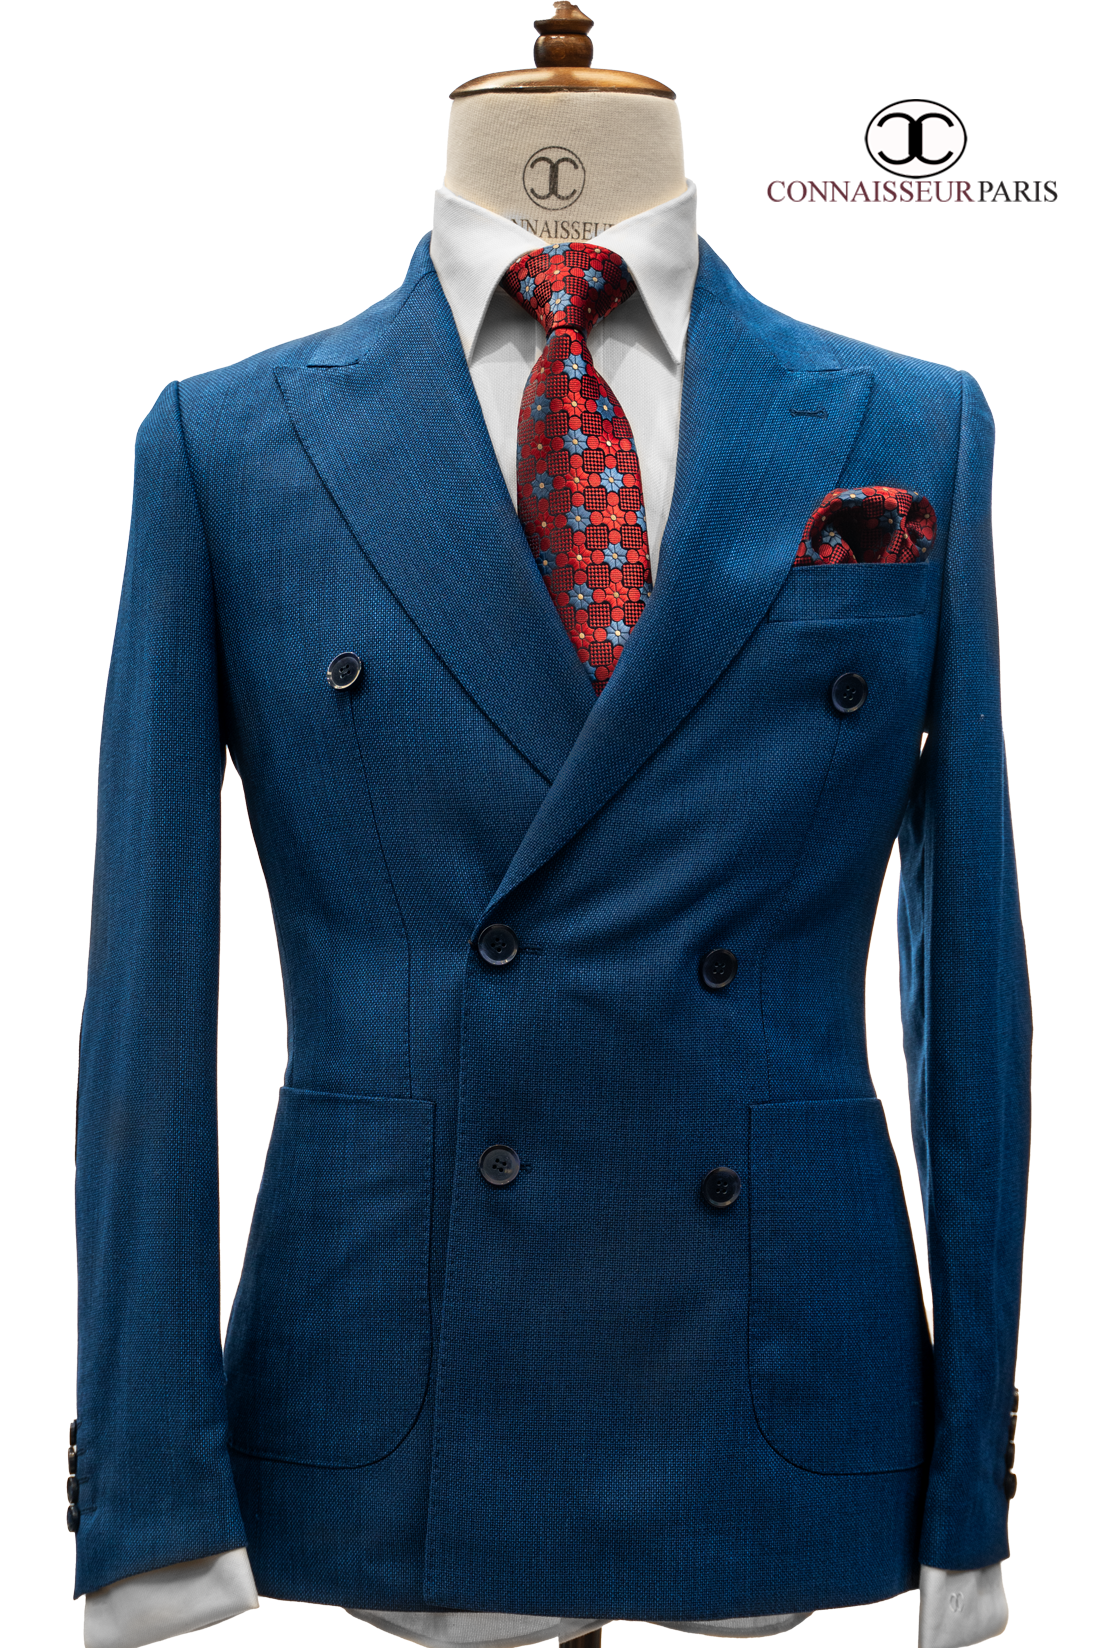 Vercelli - Blue Patch Pocket Elbow Patch Tweed Double Breasted Slim Fit 2-Piece Suit